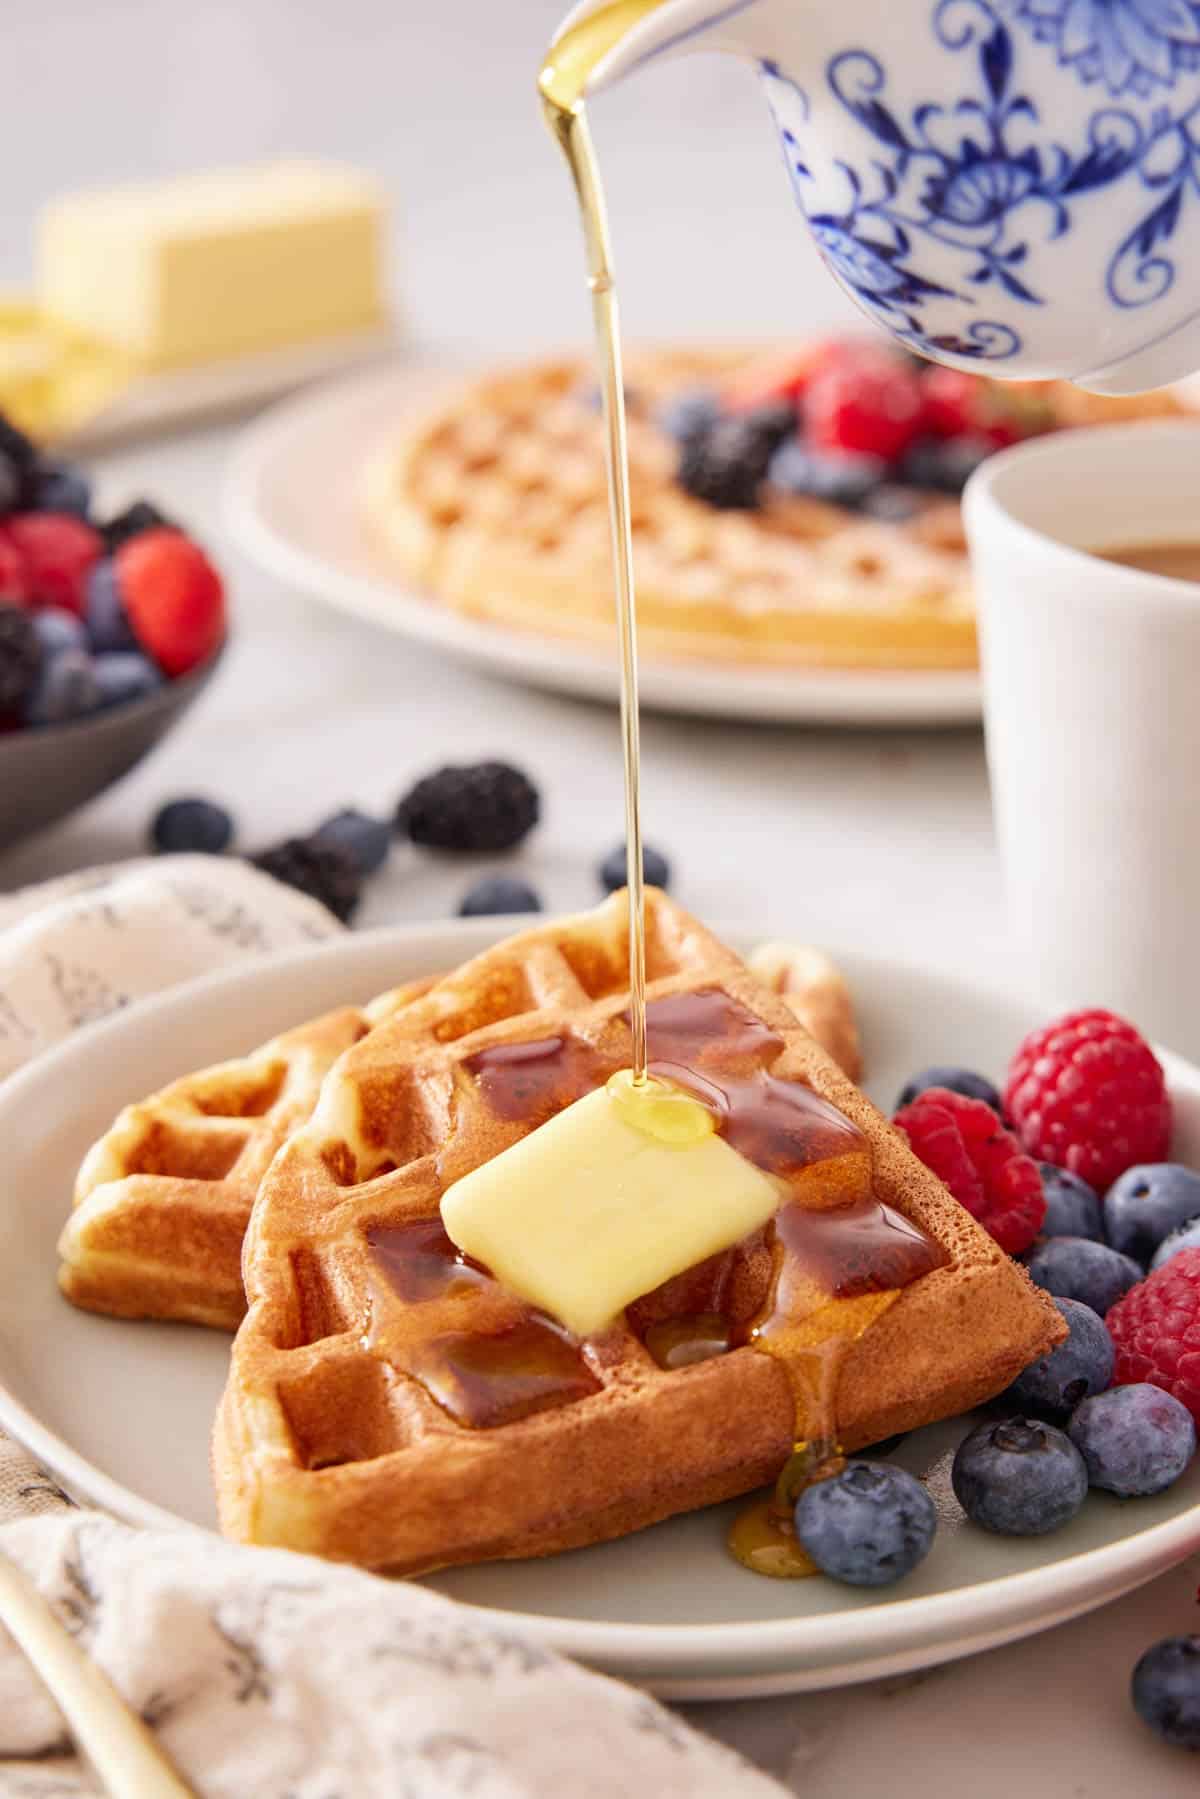 Syrup poured over Belgian waffles with butter and fruit.